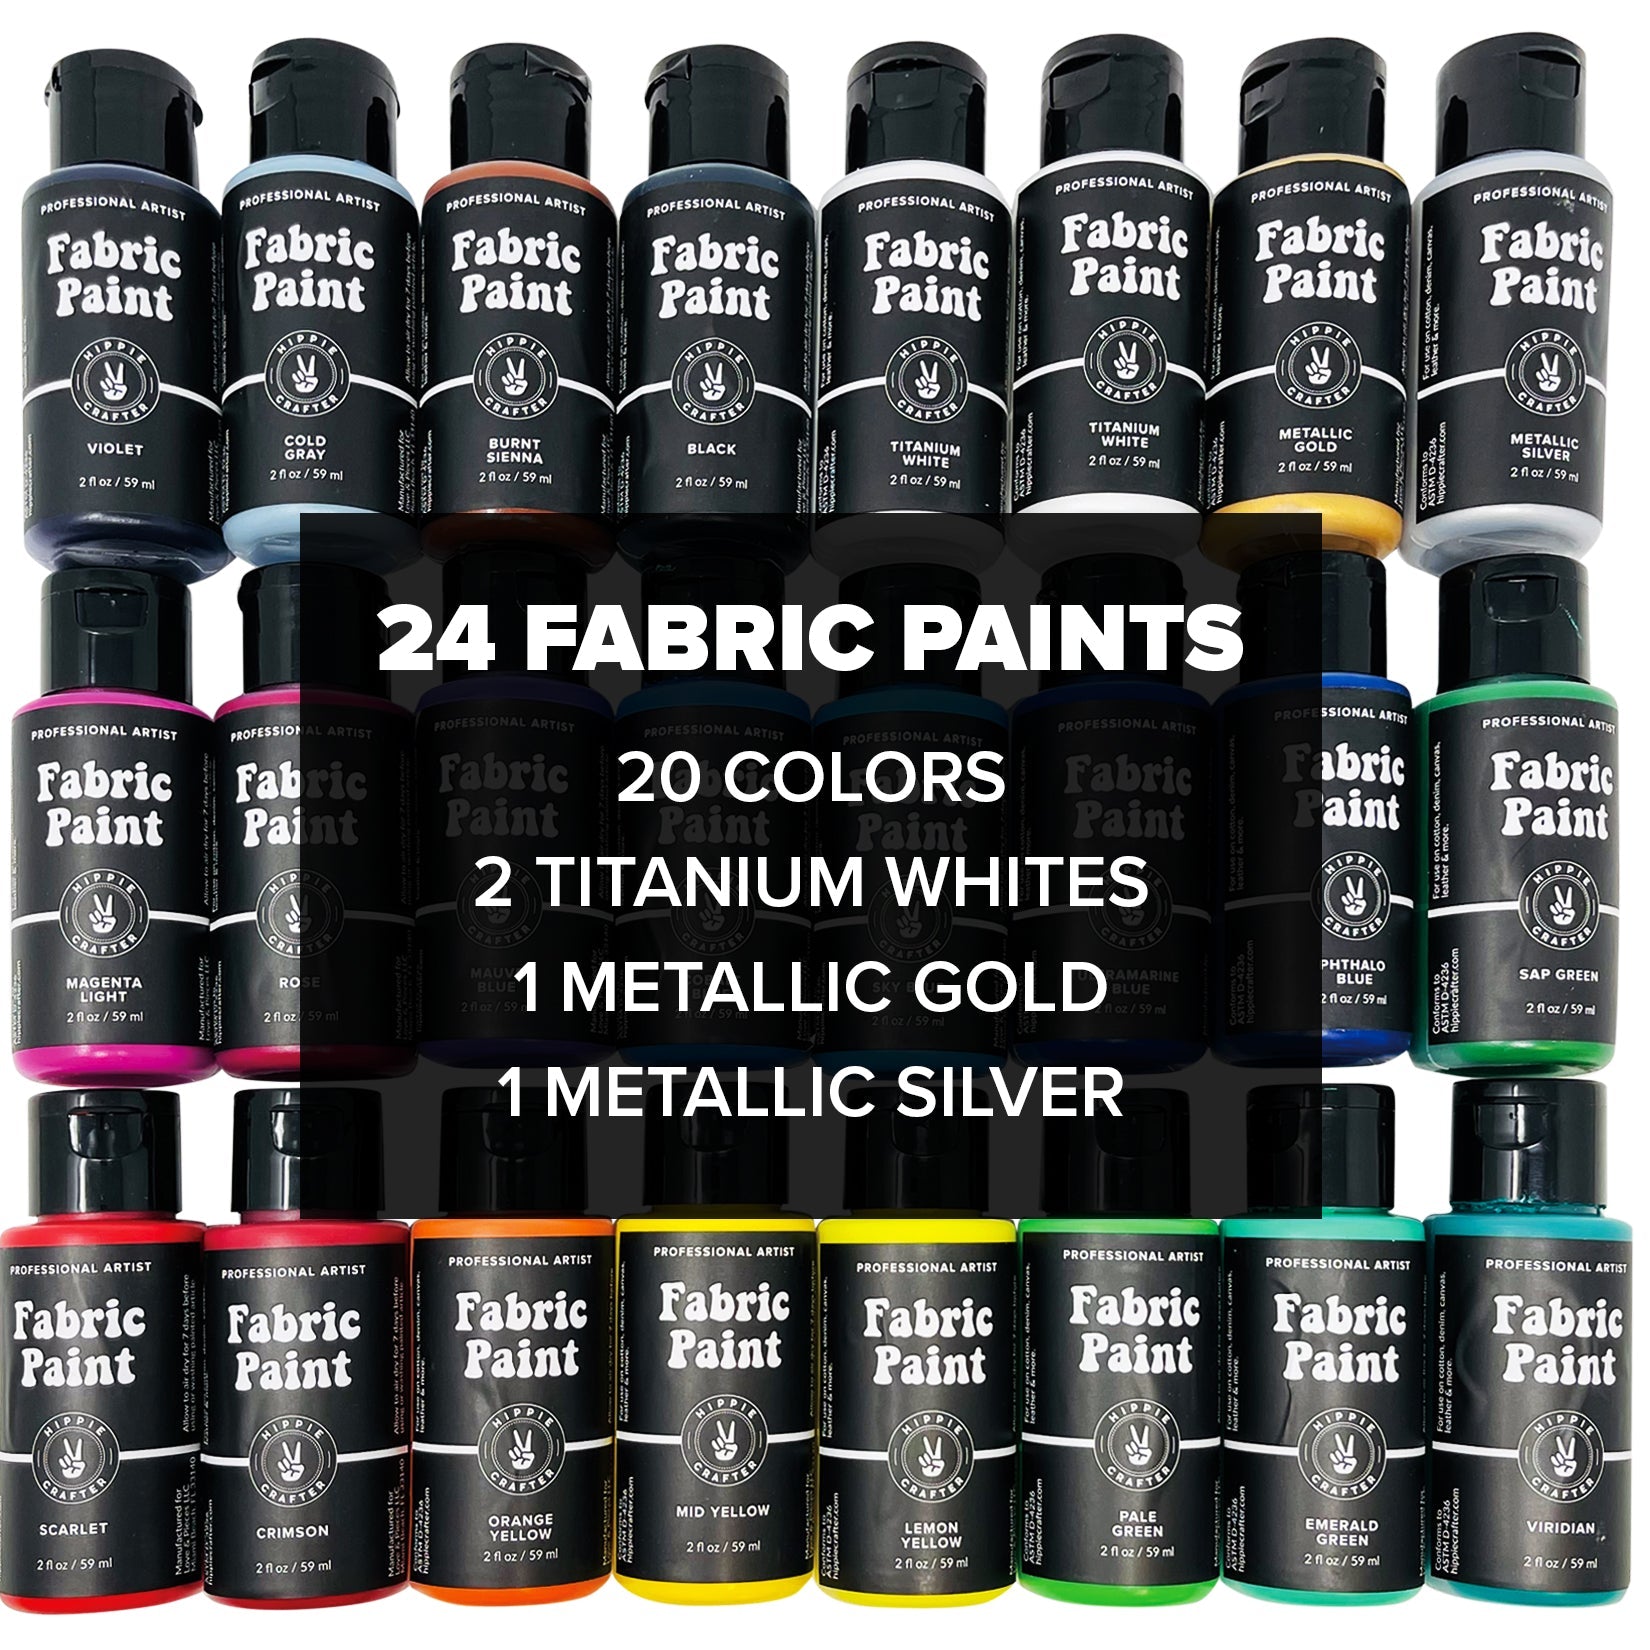 COLORFUL Fabric Paint Set for Clothes with 6 Brushes, 1 Palette, 24 Colors  - Permanent Textile Paint Puffy Paint Kit for Shoes, Canvas - Non-Toxic